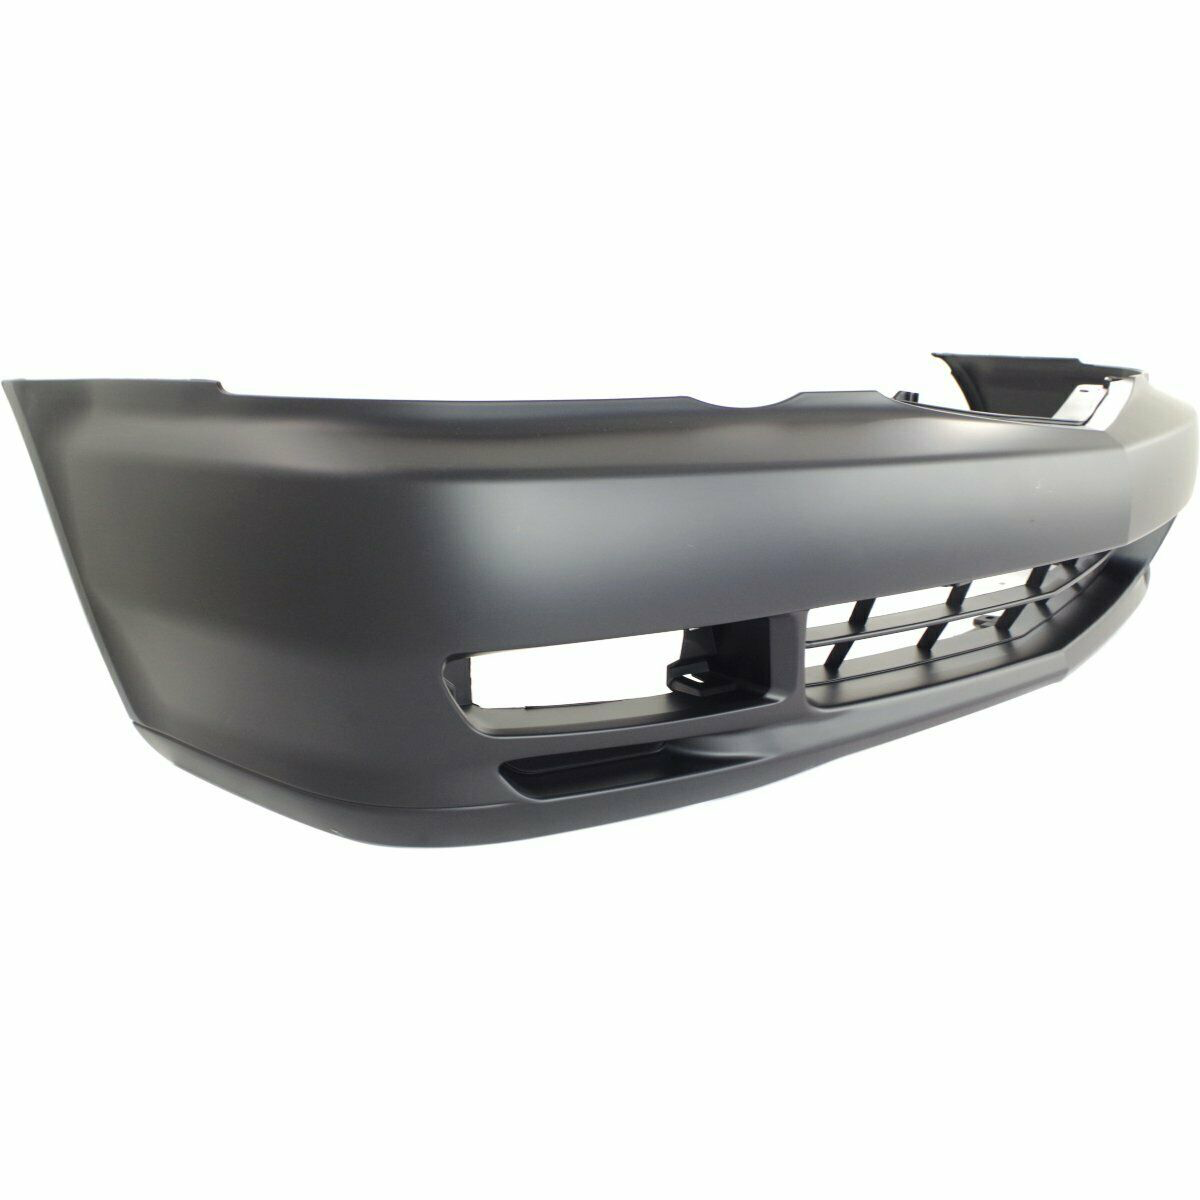 2002-2003 Acura TL Sedan Front Bumper Painted to Match